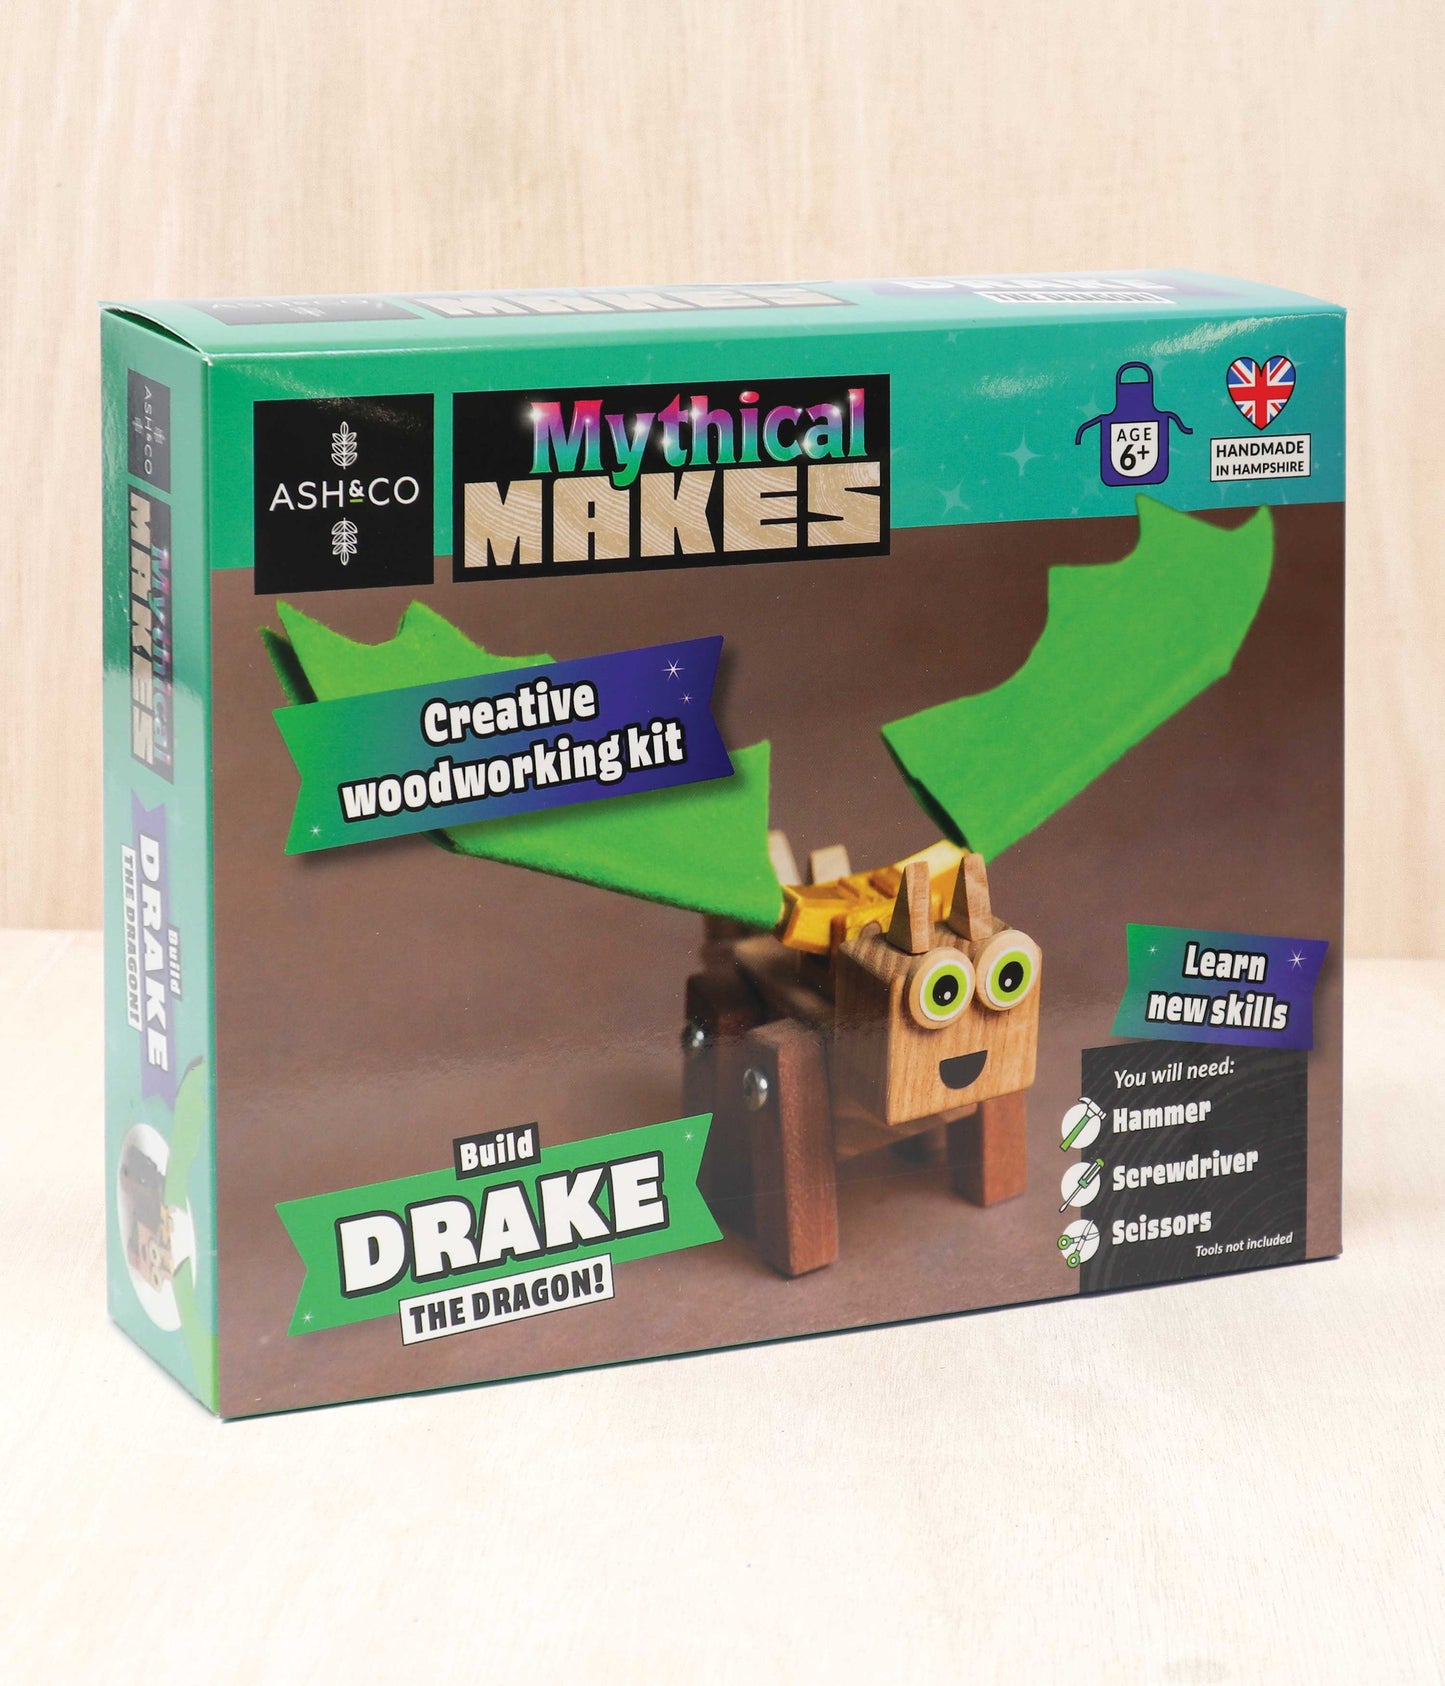 A close up for the packaging for the Build Drake the Dragon Mythical Makes wood craft kit for kids